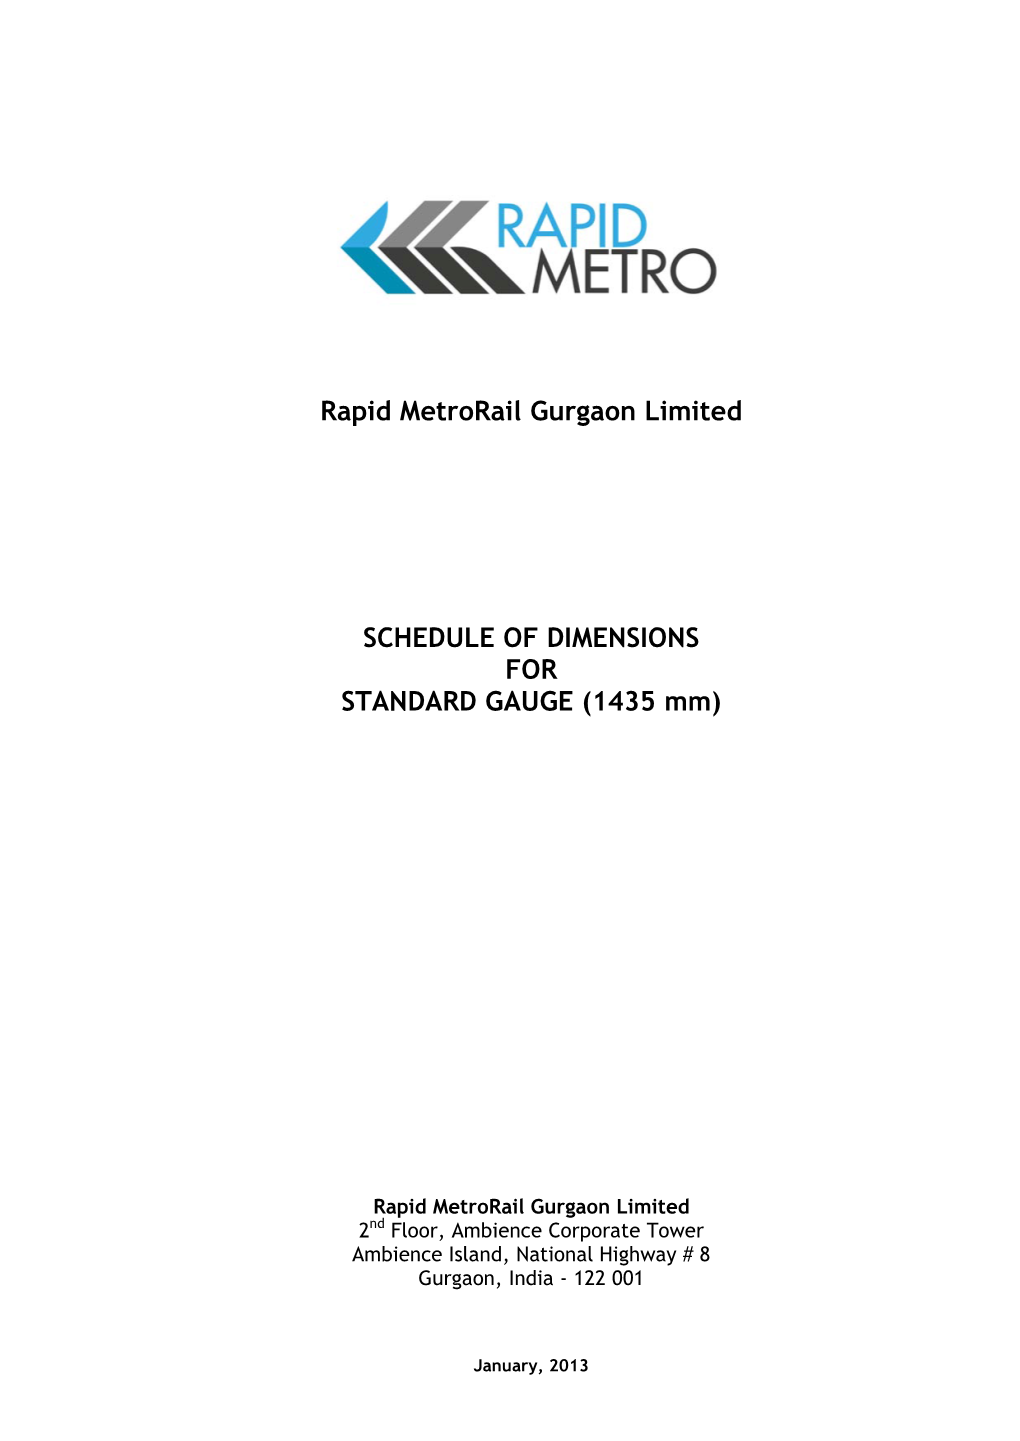 Rapid Metrorail Gurgaon Limited SCHEDULE of DIMENSIONS FOR